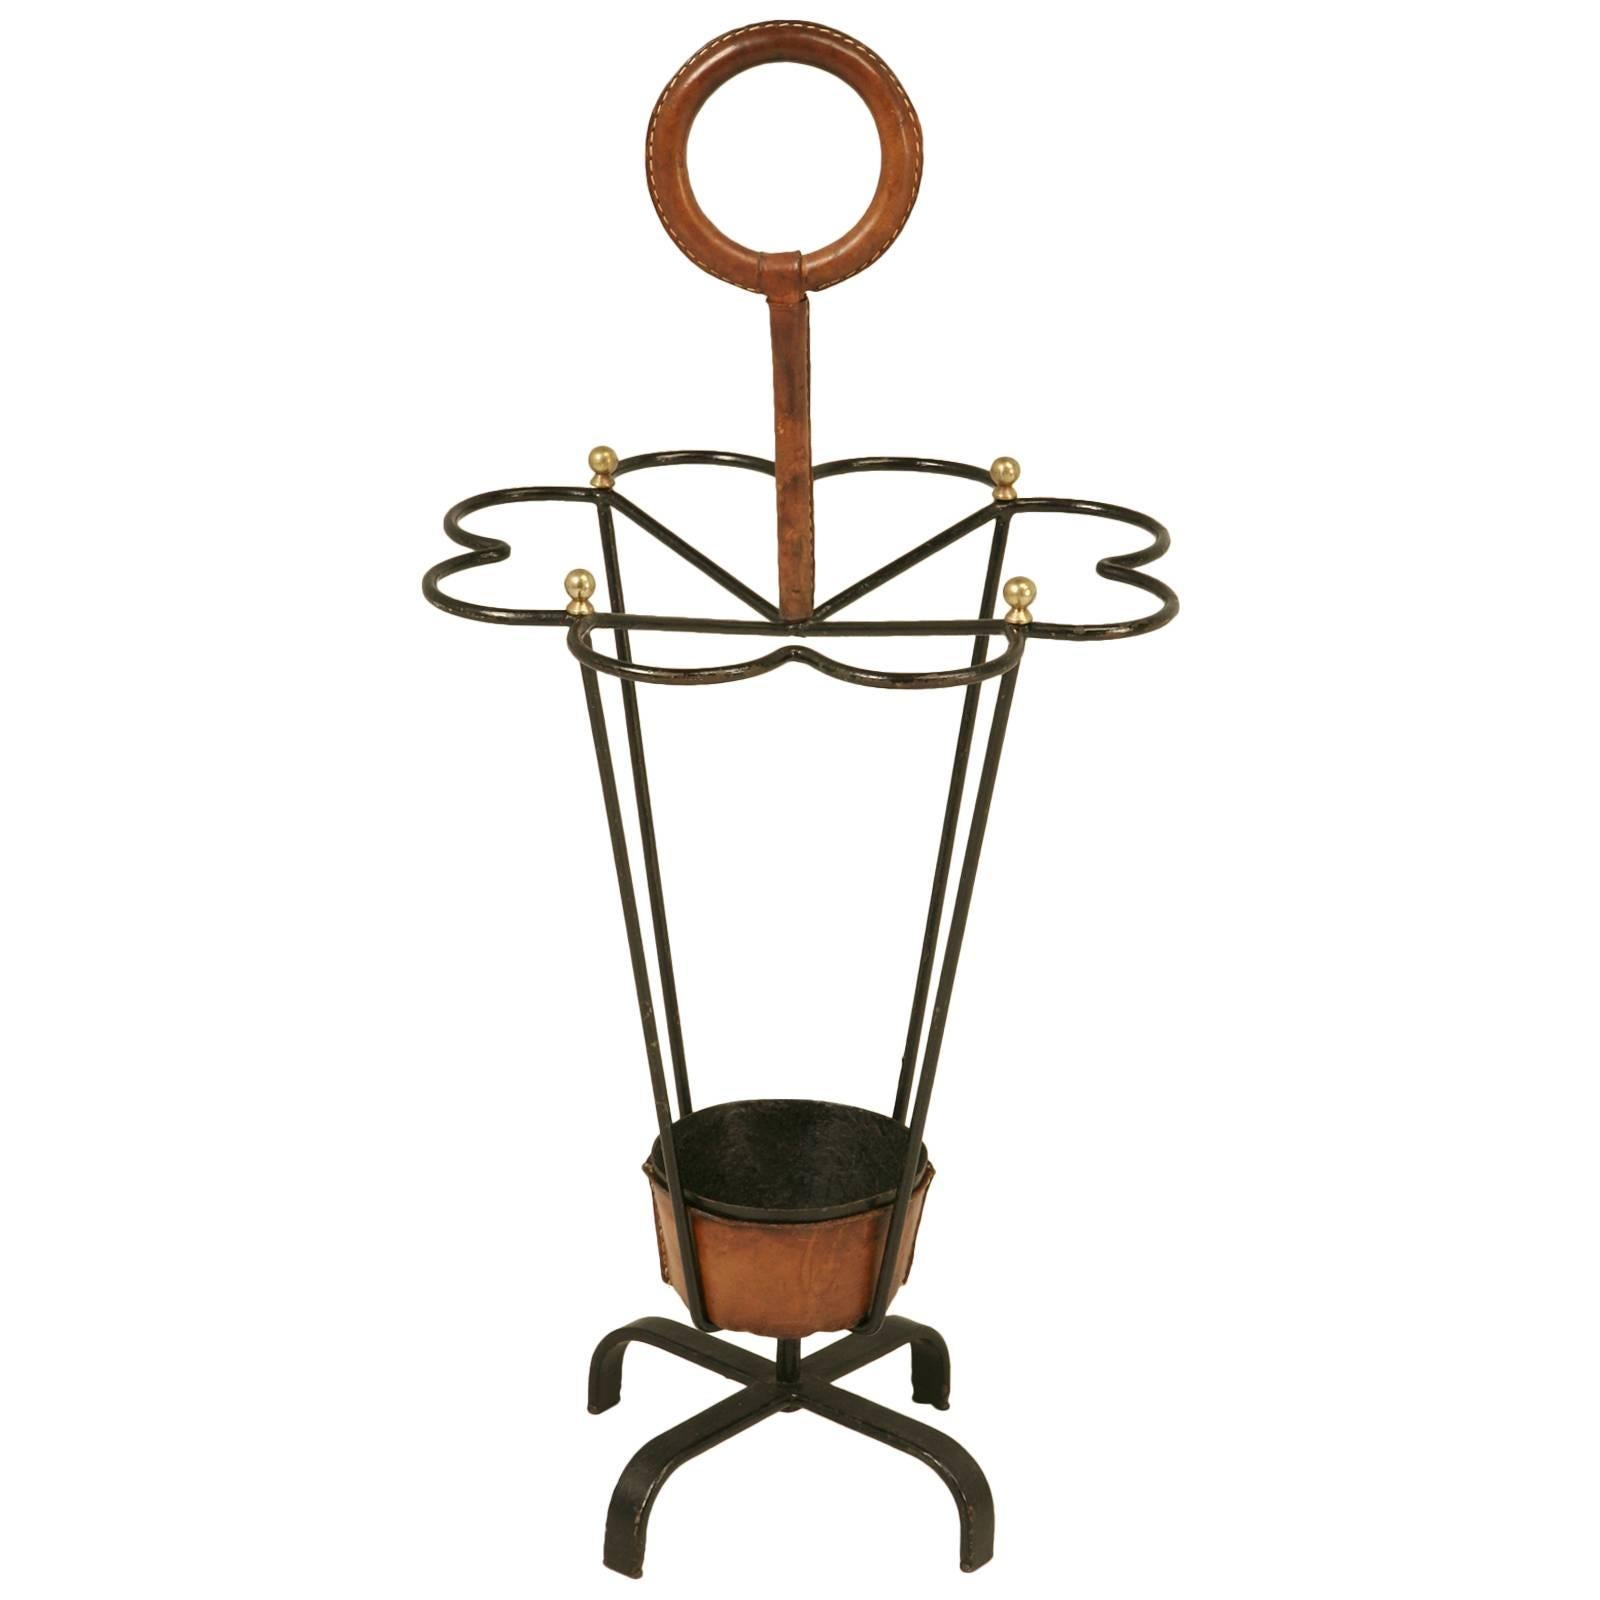 Jacques Adnet Leather Wrapped Umbrella Stand Completely Original and Very Nice For Sale